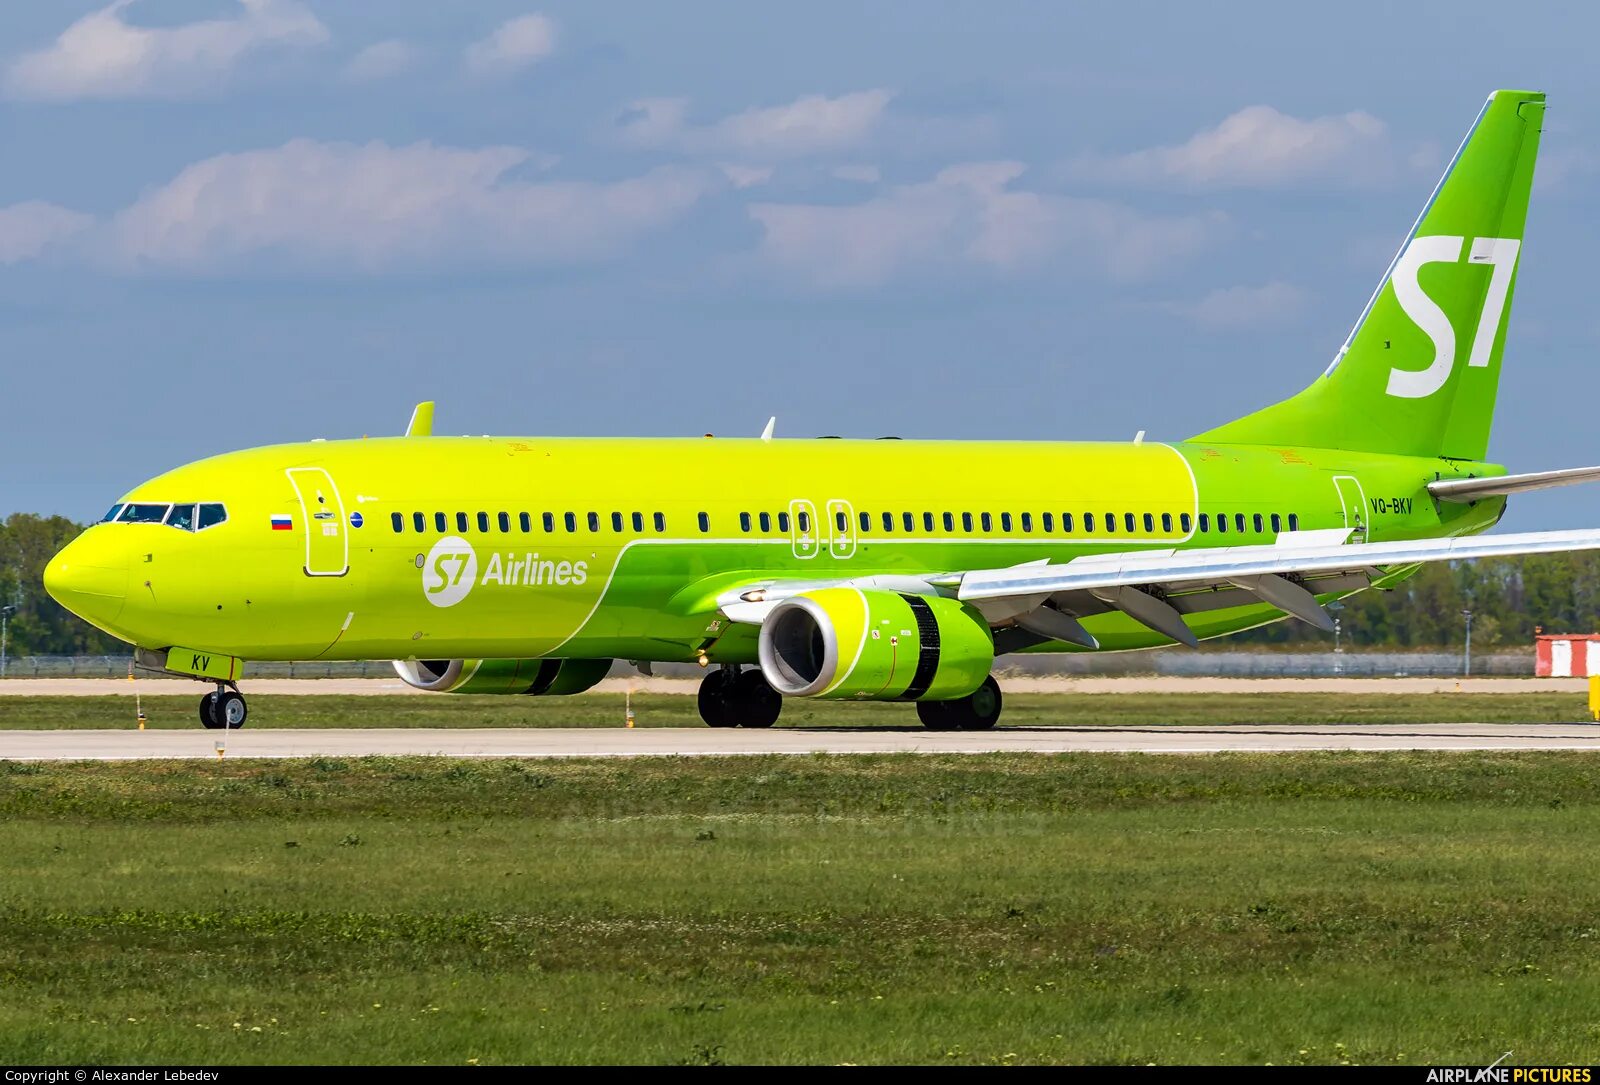 Горячая s7 airlines. S7 Airlines Boeing 737-800. S7 Airlines 5220. BKW s7. Boeing 737-800 s7 logo.